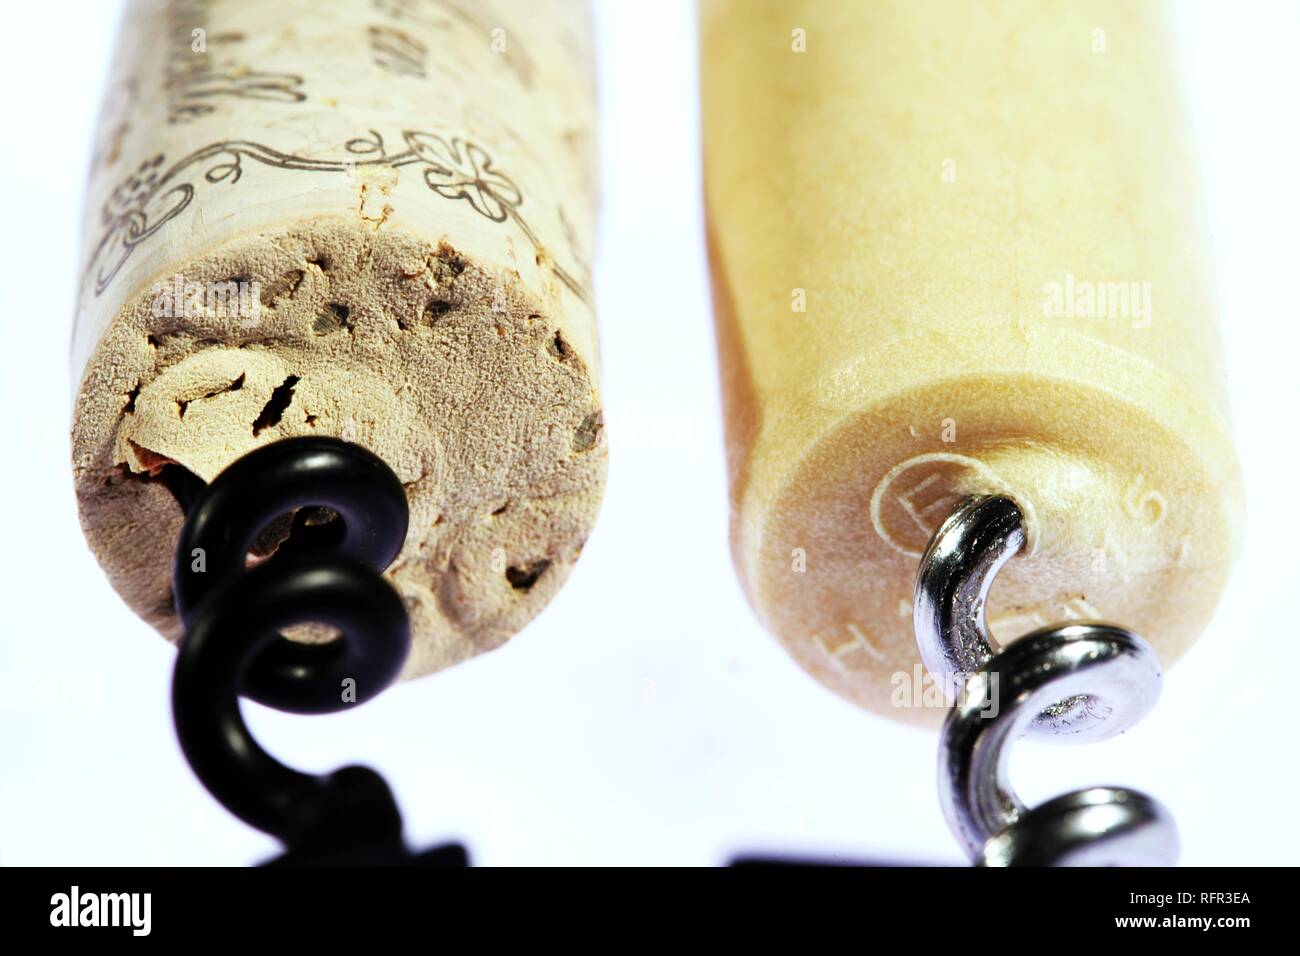 Natural cork and artificial cork with cork screw Stock Photo